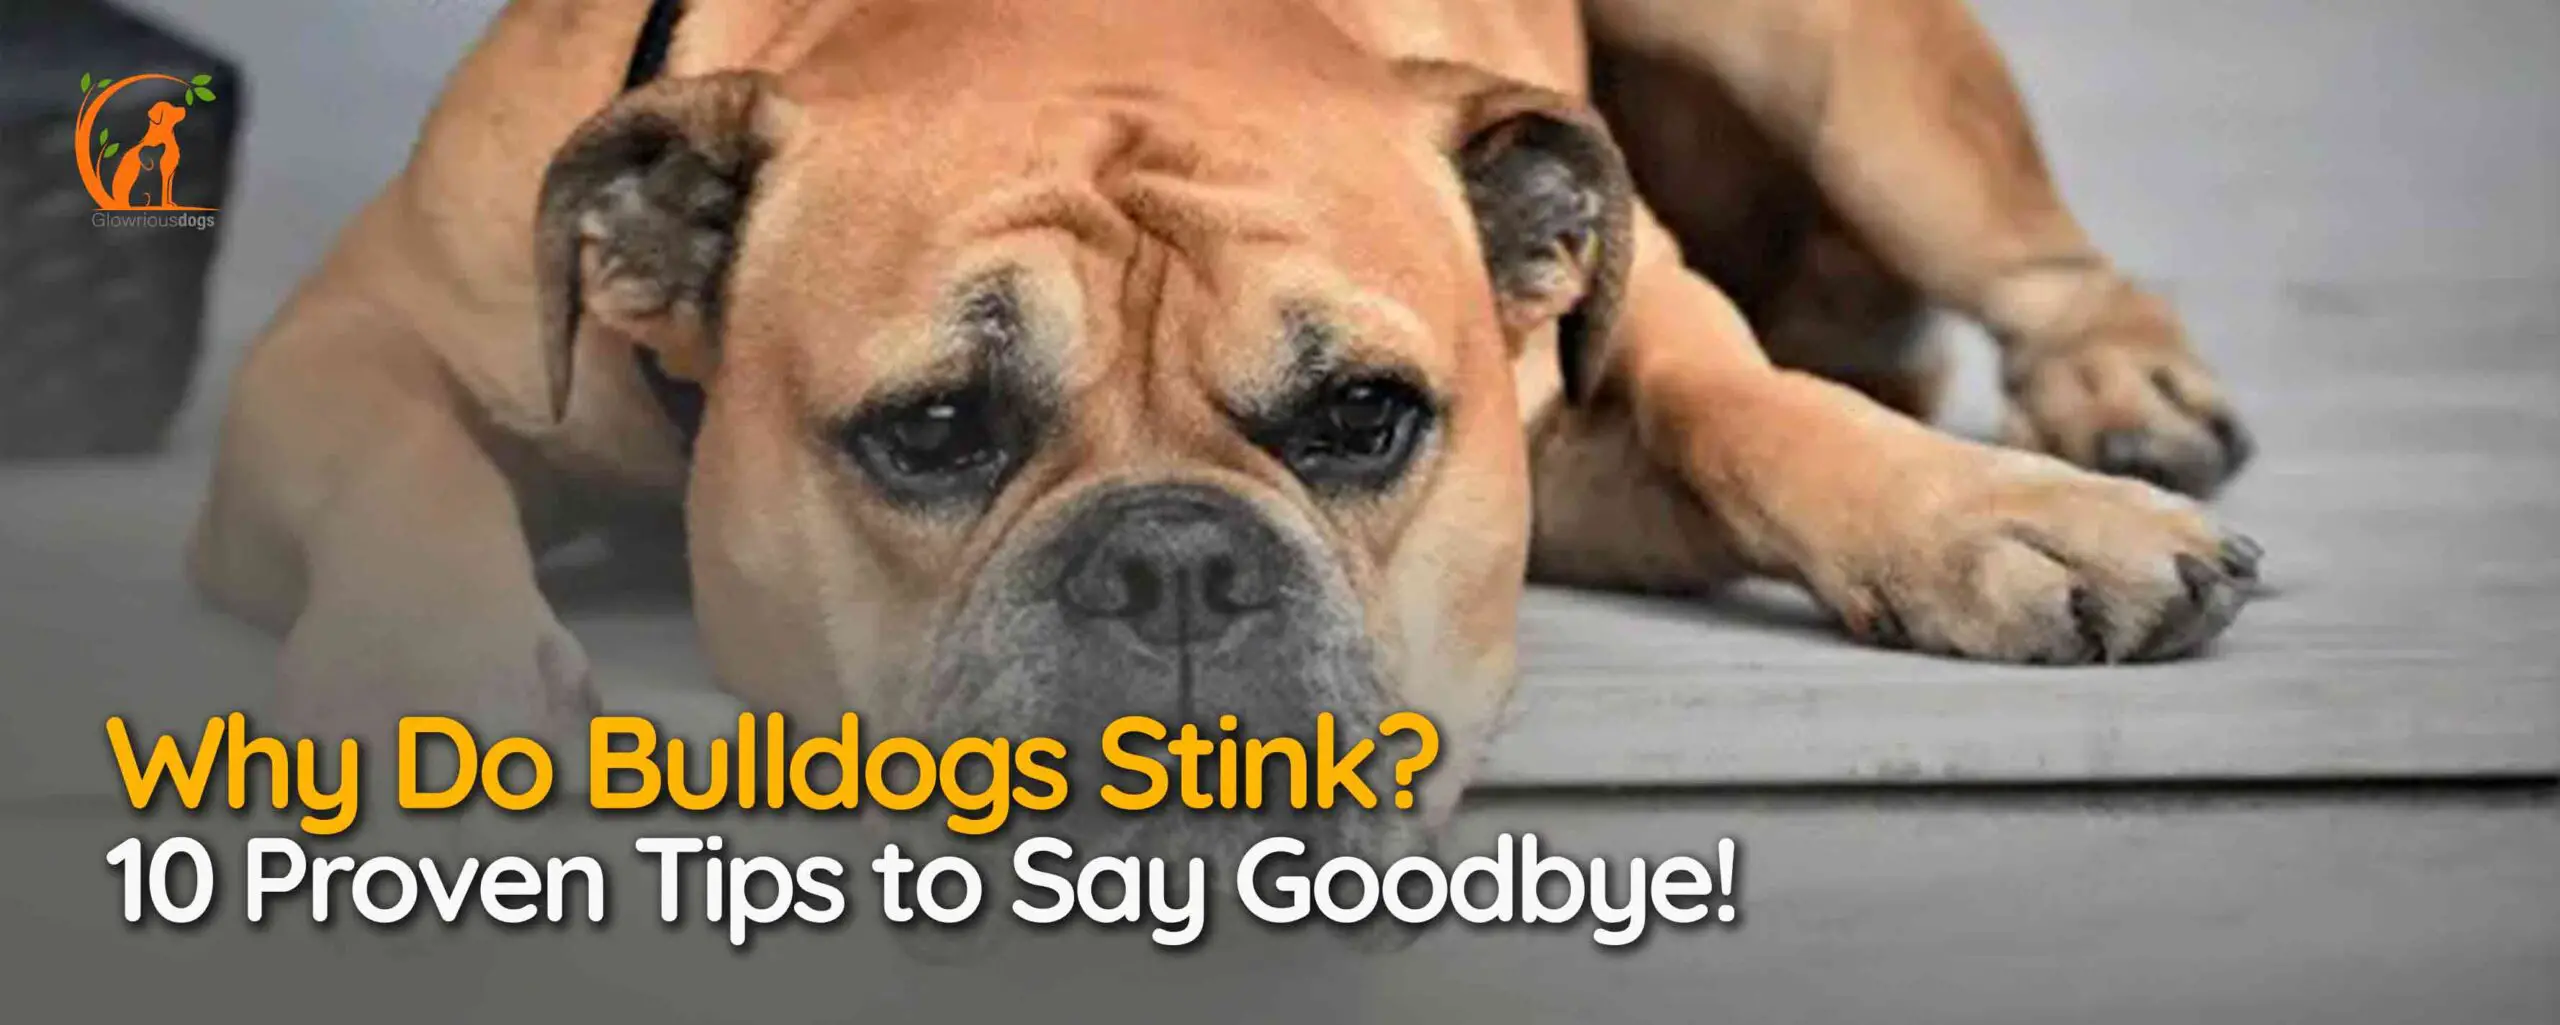 Why Do Bulldogs Stink